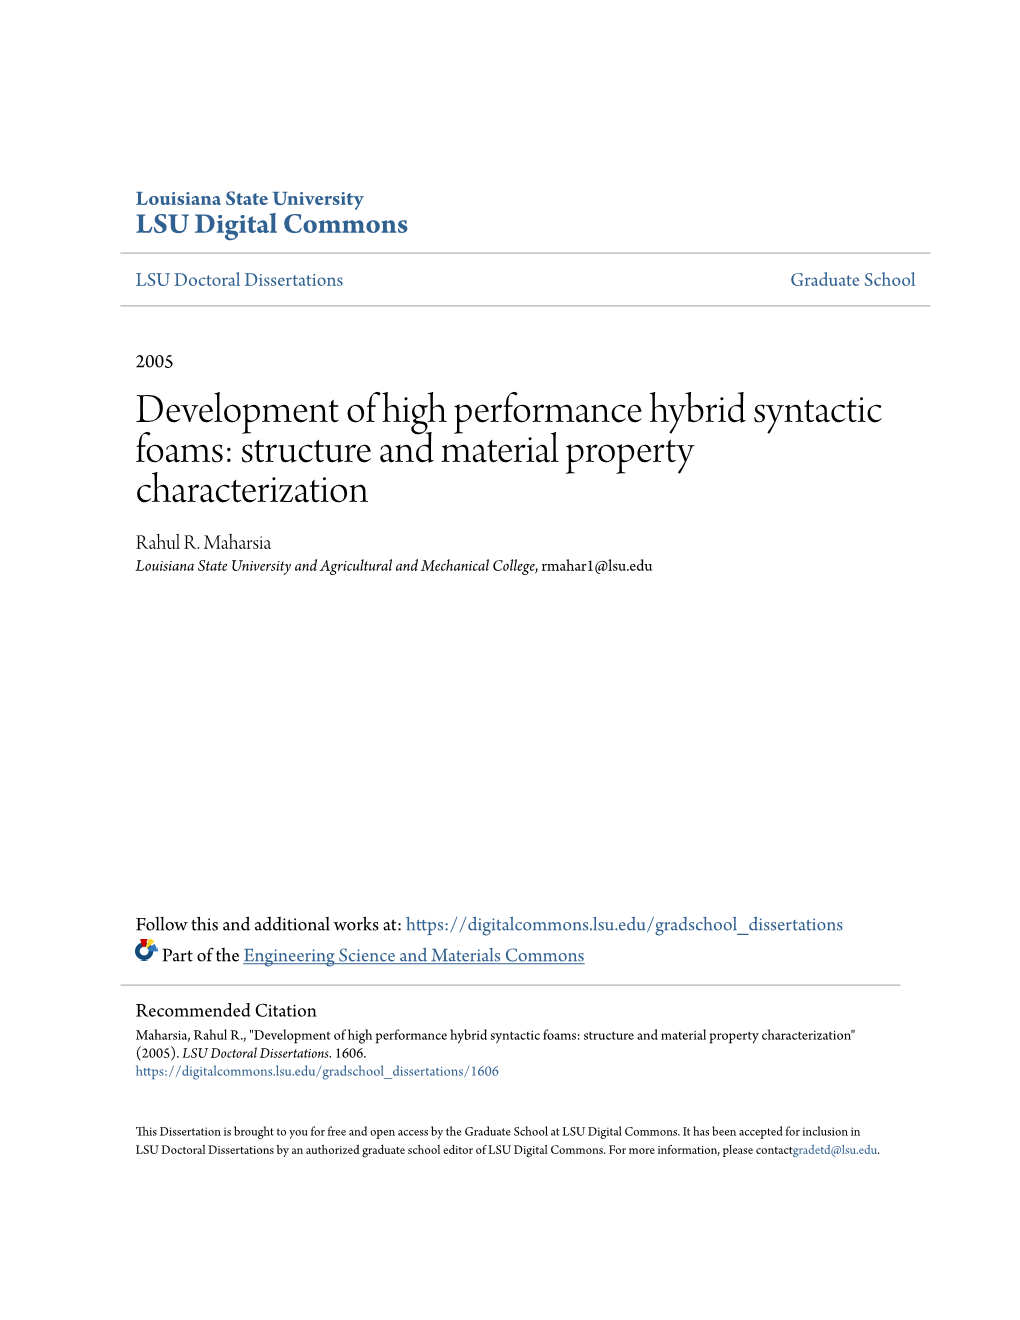 Development of High Performance Hybrid Syntactic Foams: Structure and Material Property Characterization Rahul R